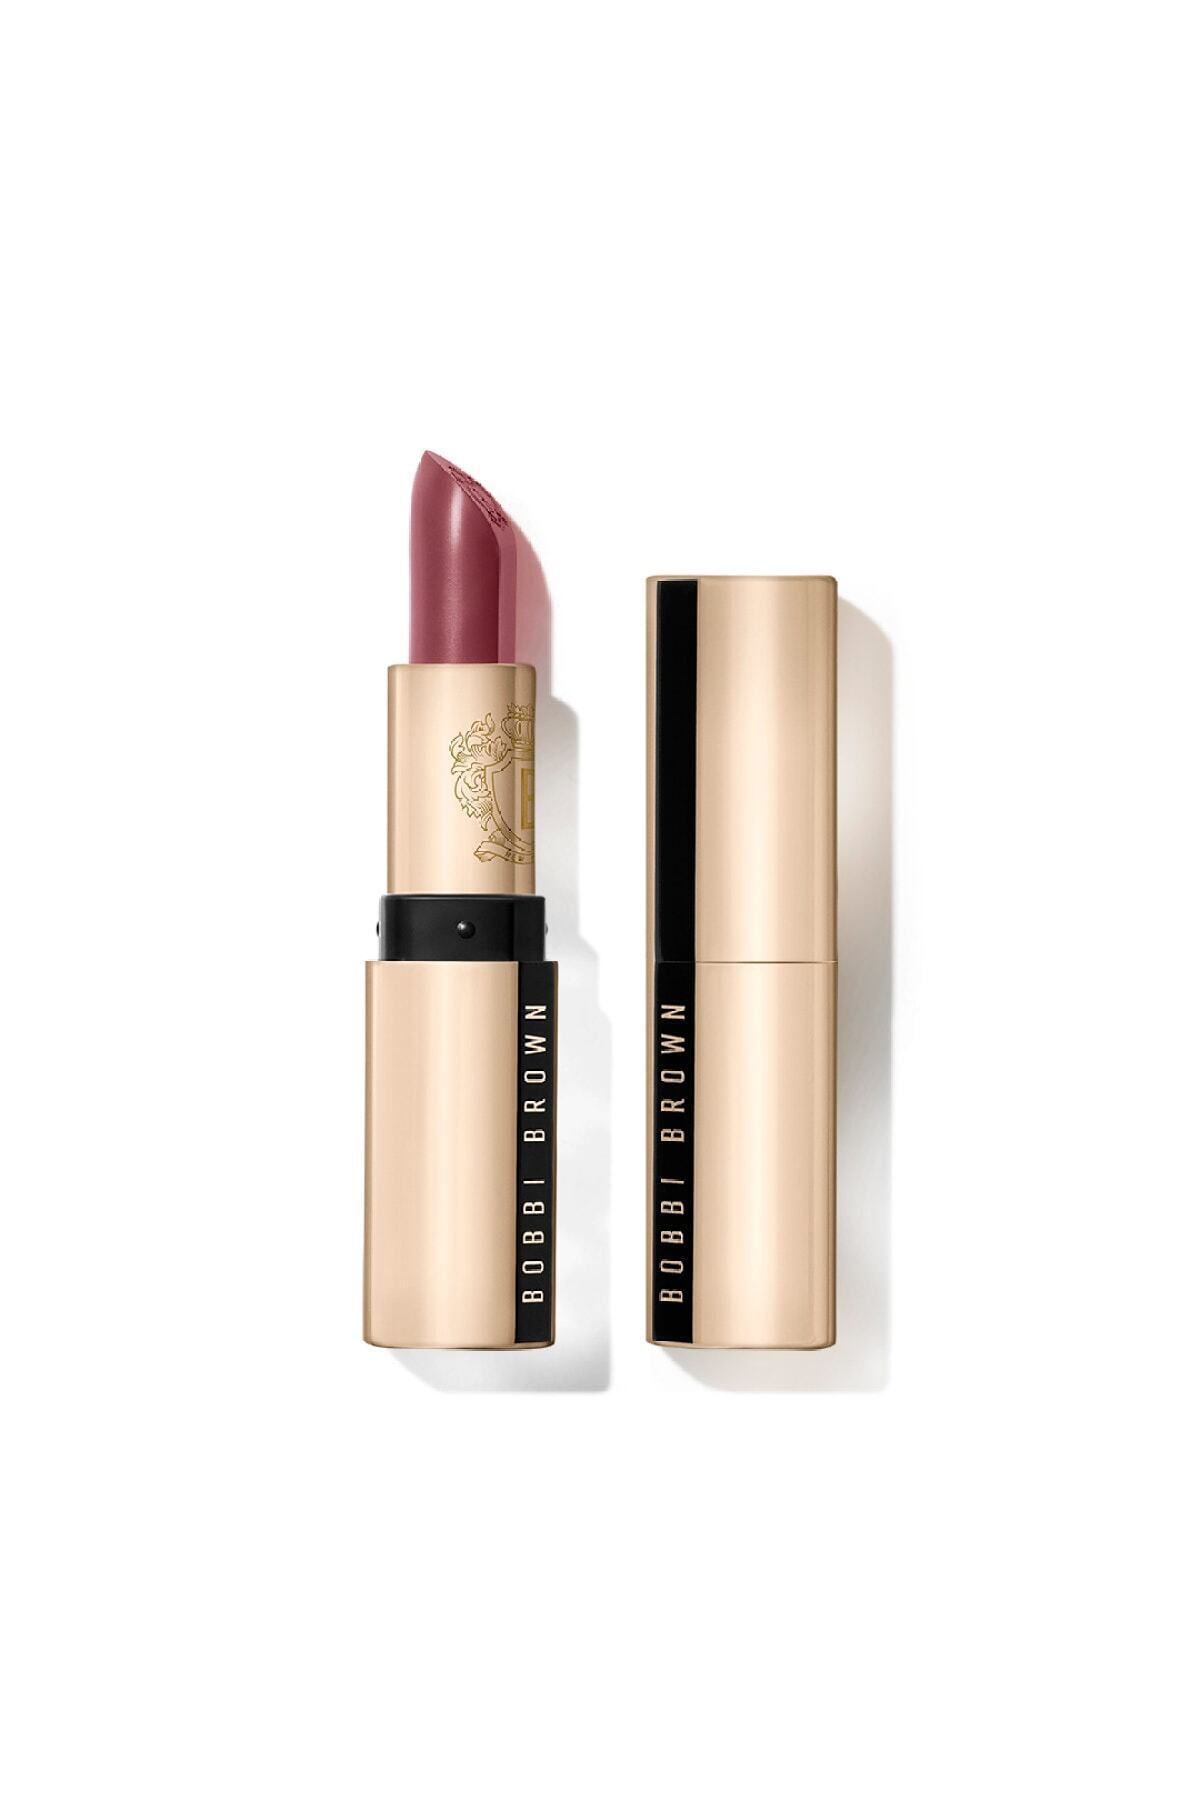 Bobbi Brown ROSE BLOSSOM - INTENSELY PİGMENTED LUXE LİPSTİCK IMPRESSİVE LİPSTİCK WİTH SATİN FİNİSH PSSN1360